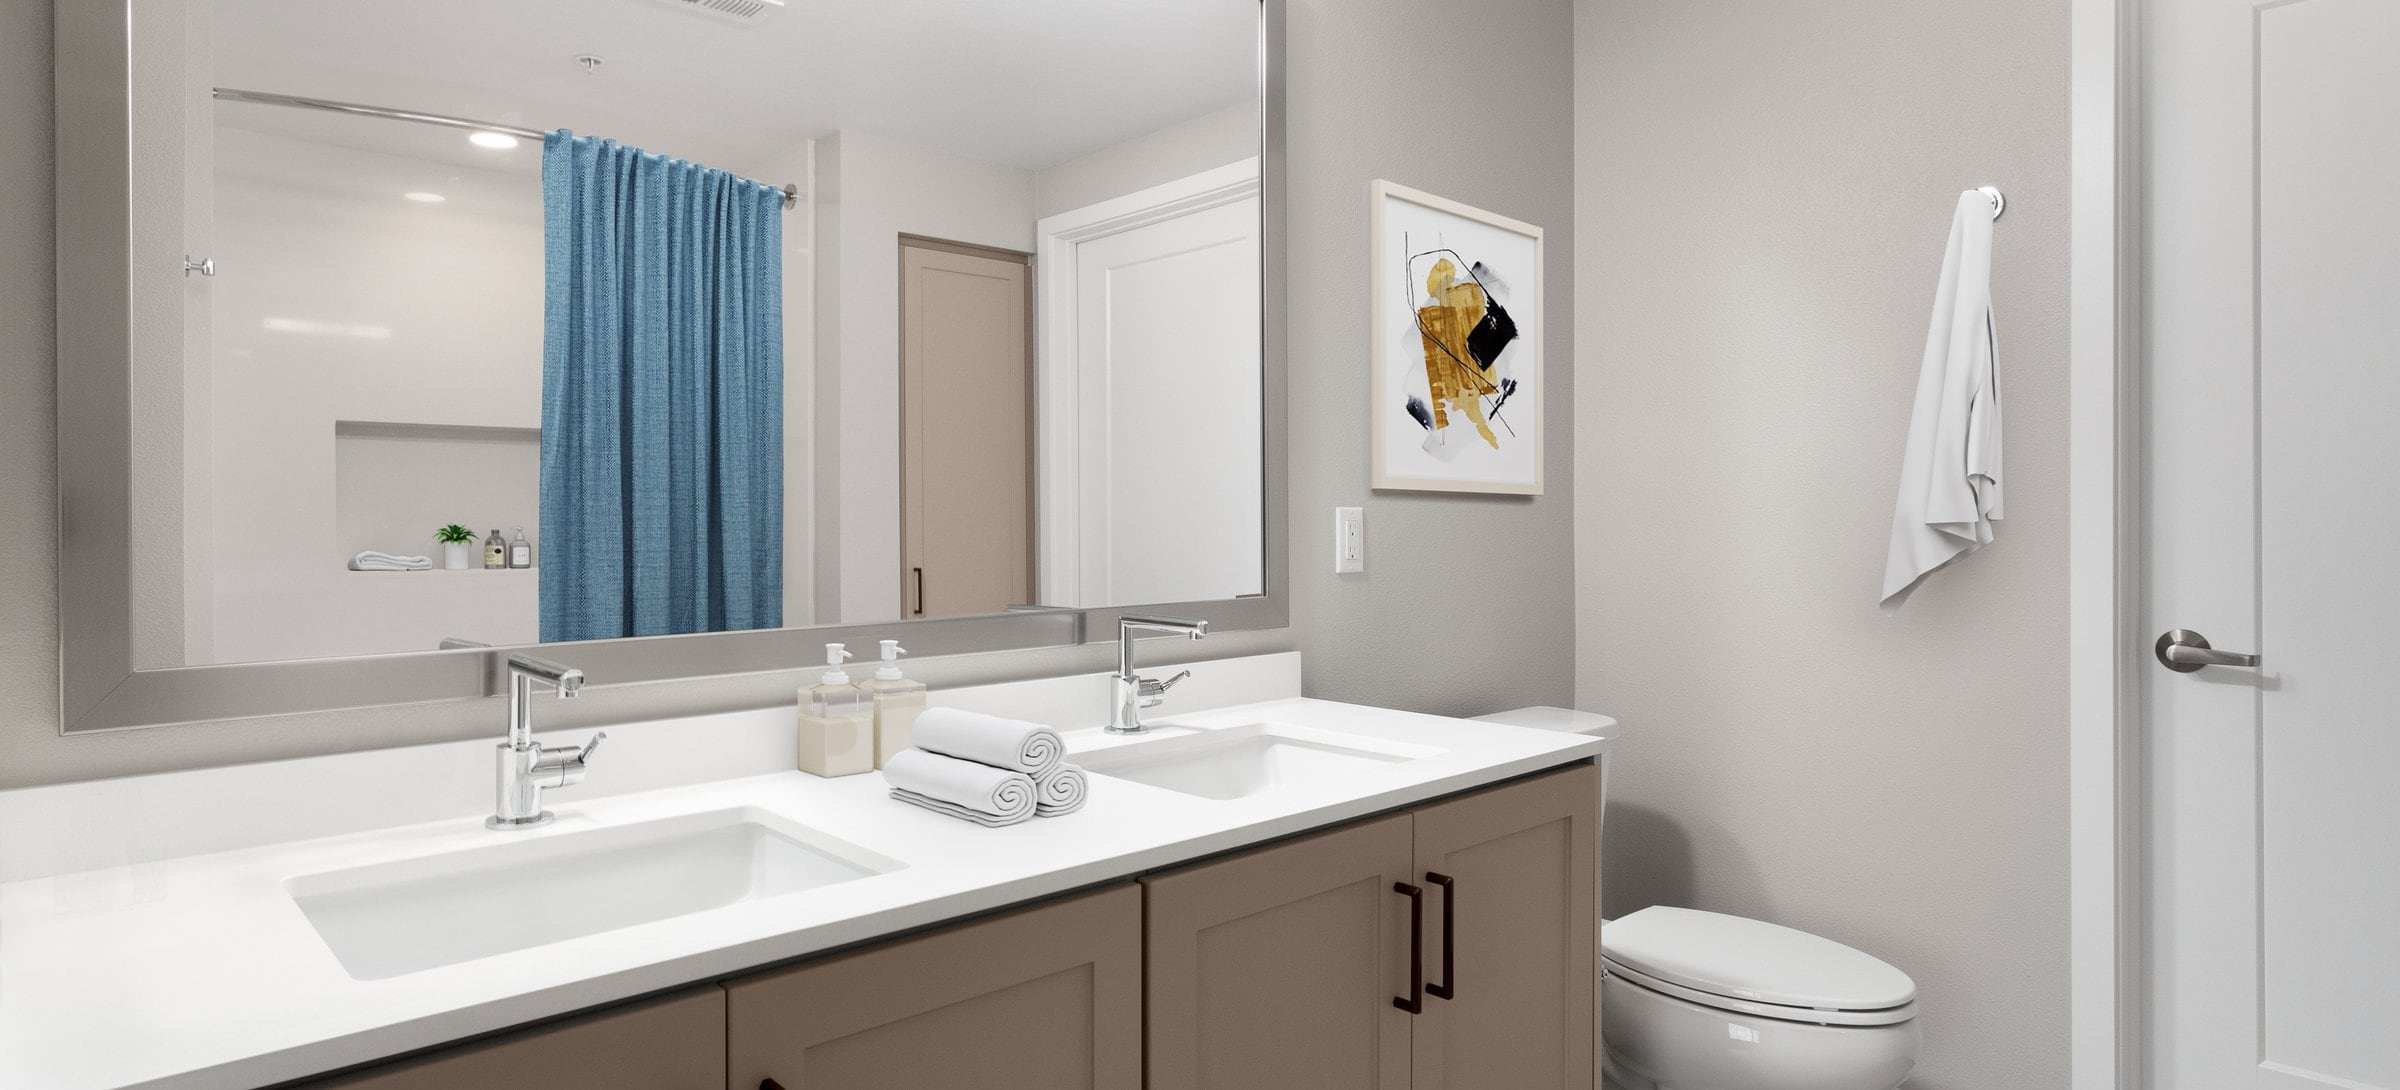 Townhome bath with white quartz countertops, brown cabinetry, and hard surface flooring (select homes)